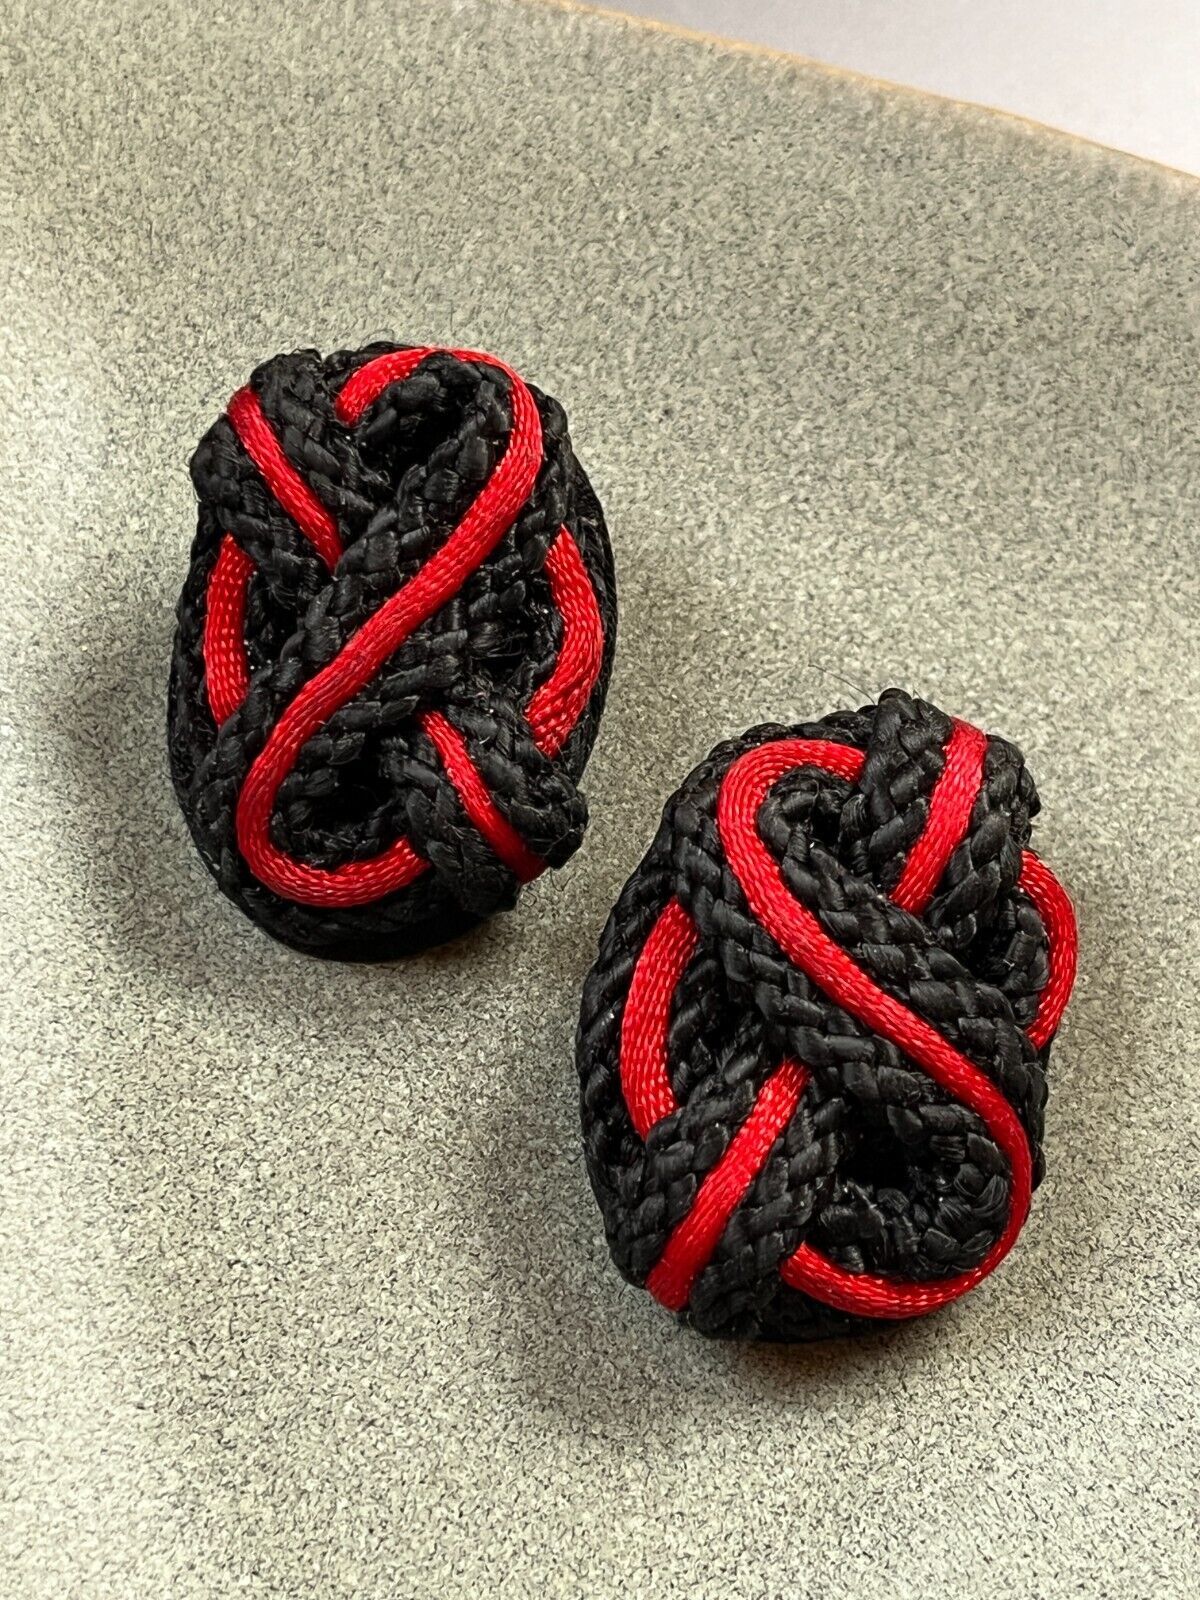 Primary image for Large Black Braided w Red Cord Twist Knot Oval Post Earrings for Pierced Ears –